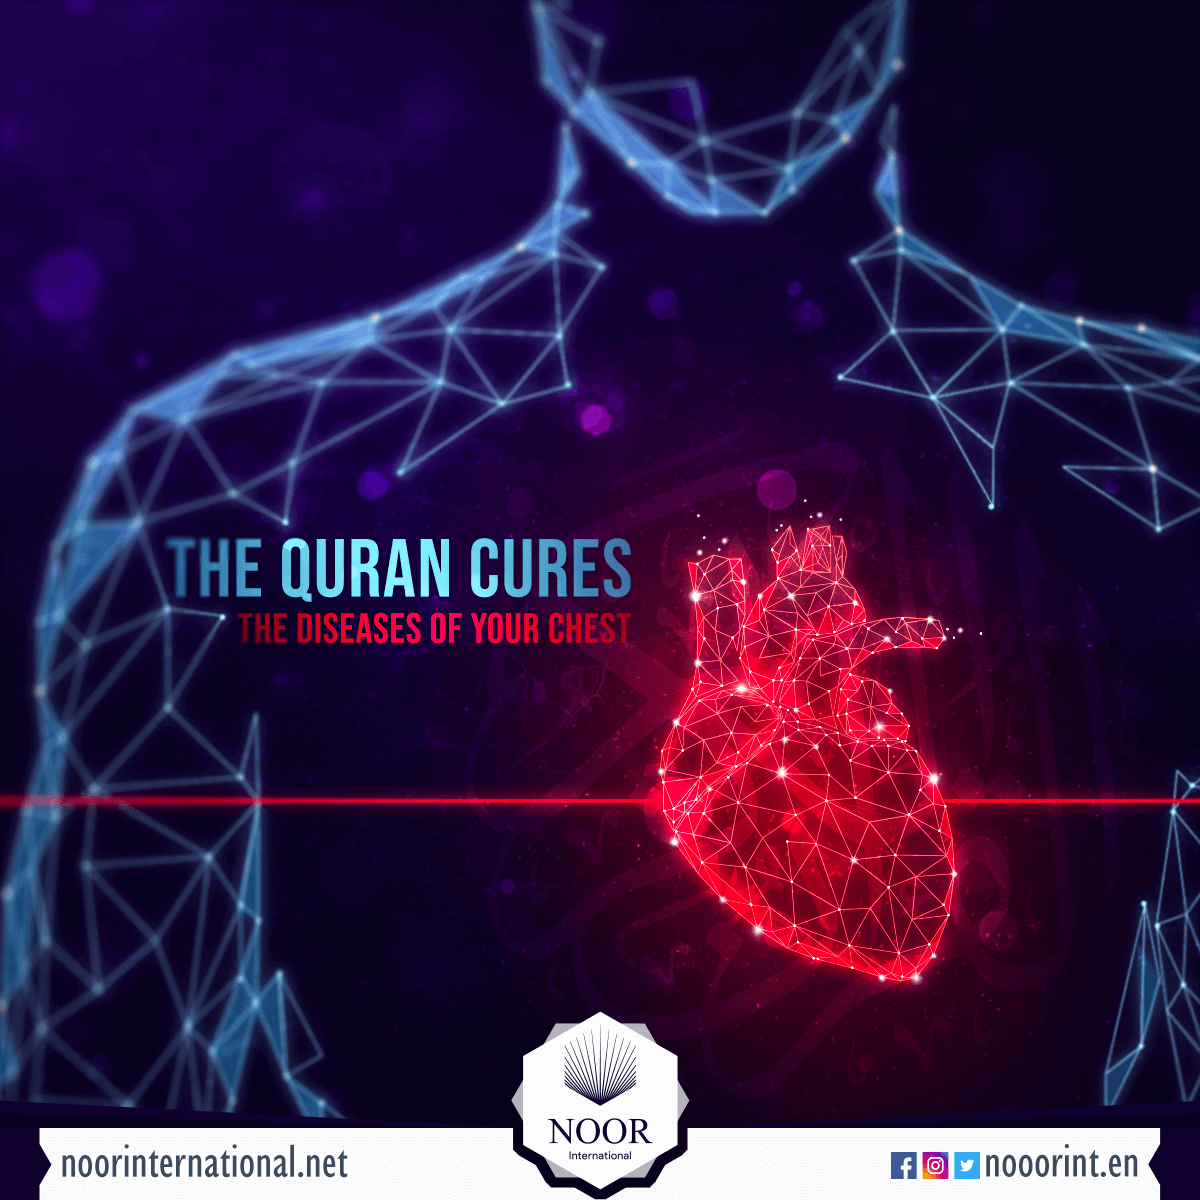 The Quran cures the diseases of your chest